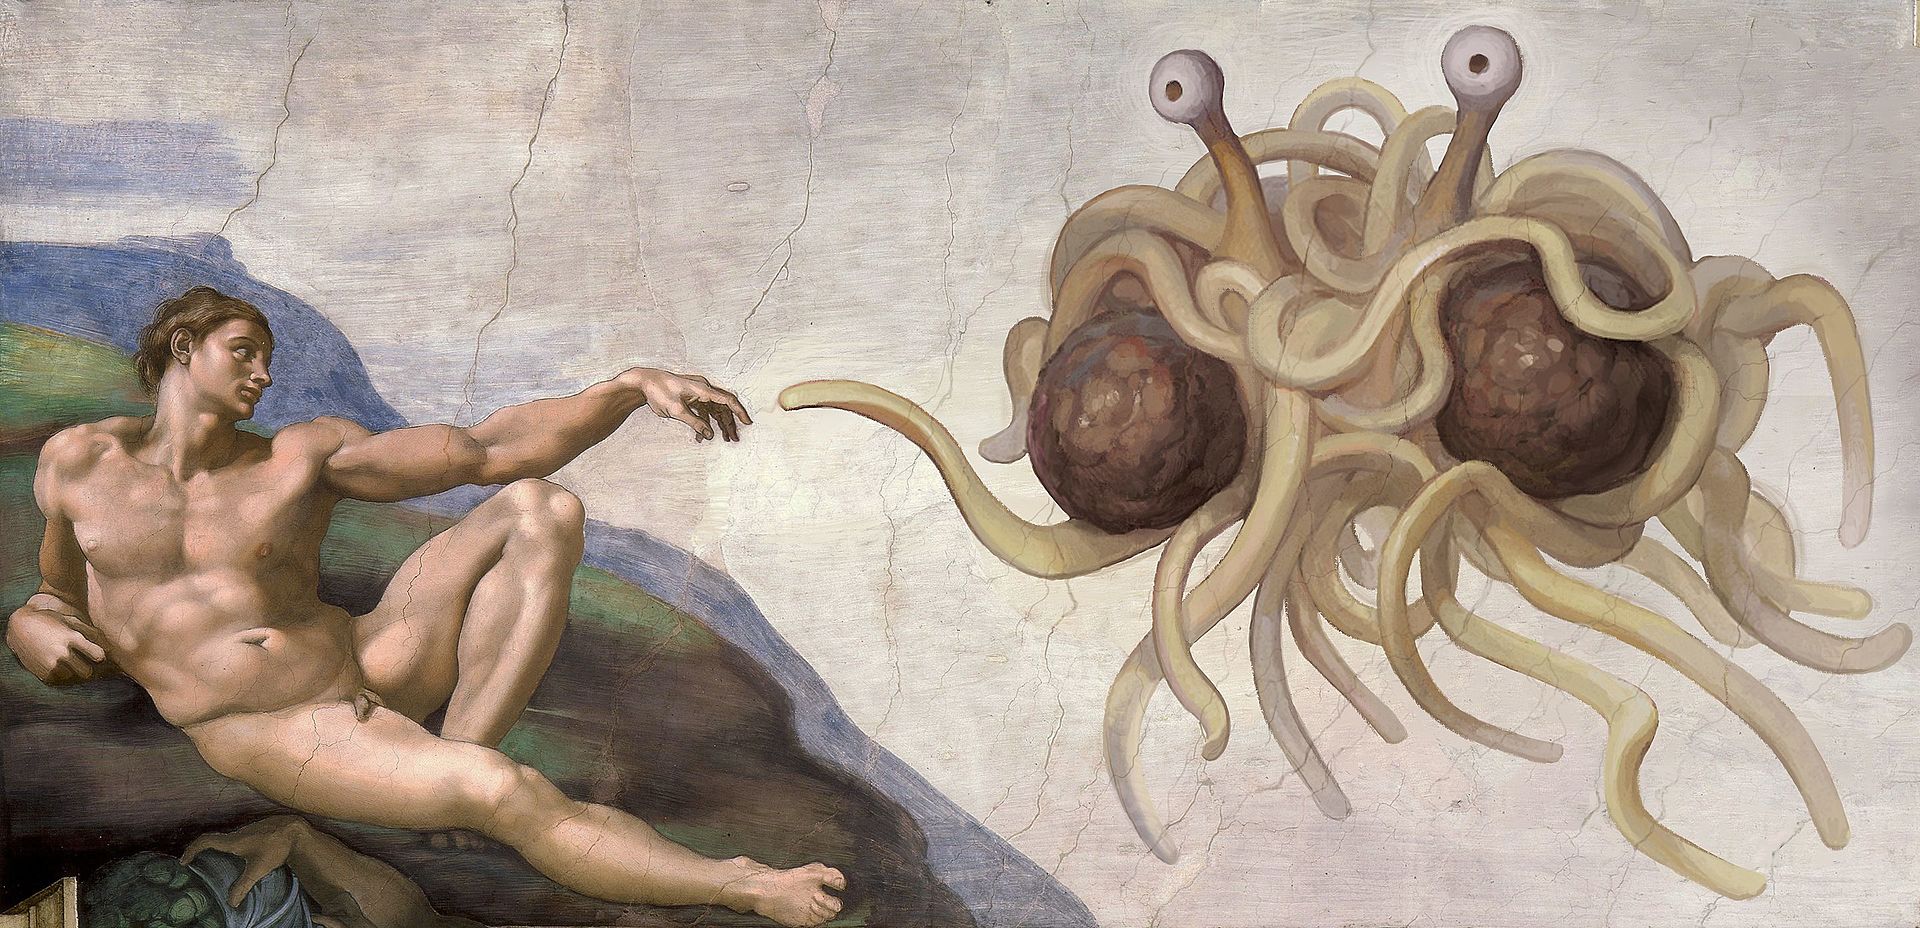 Touched by the FSM